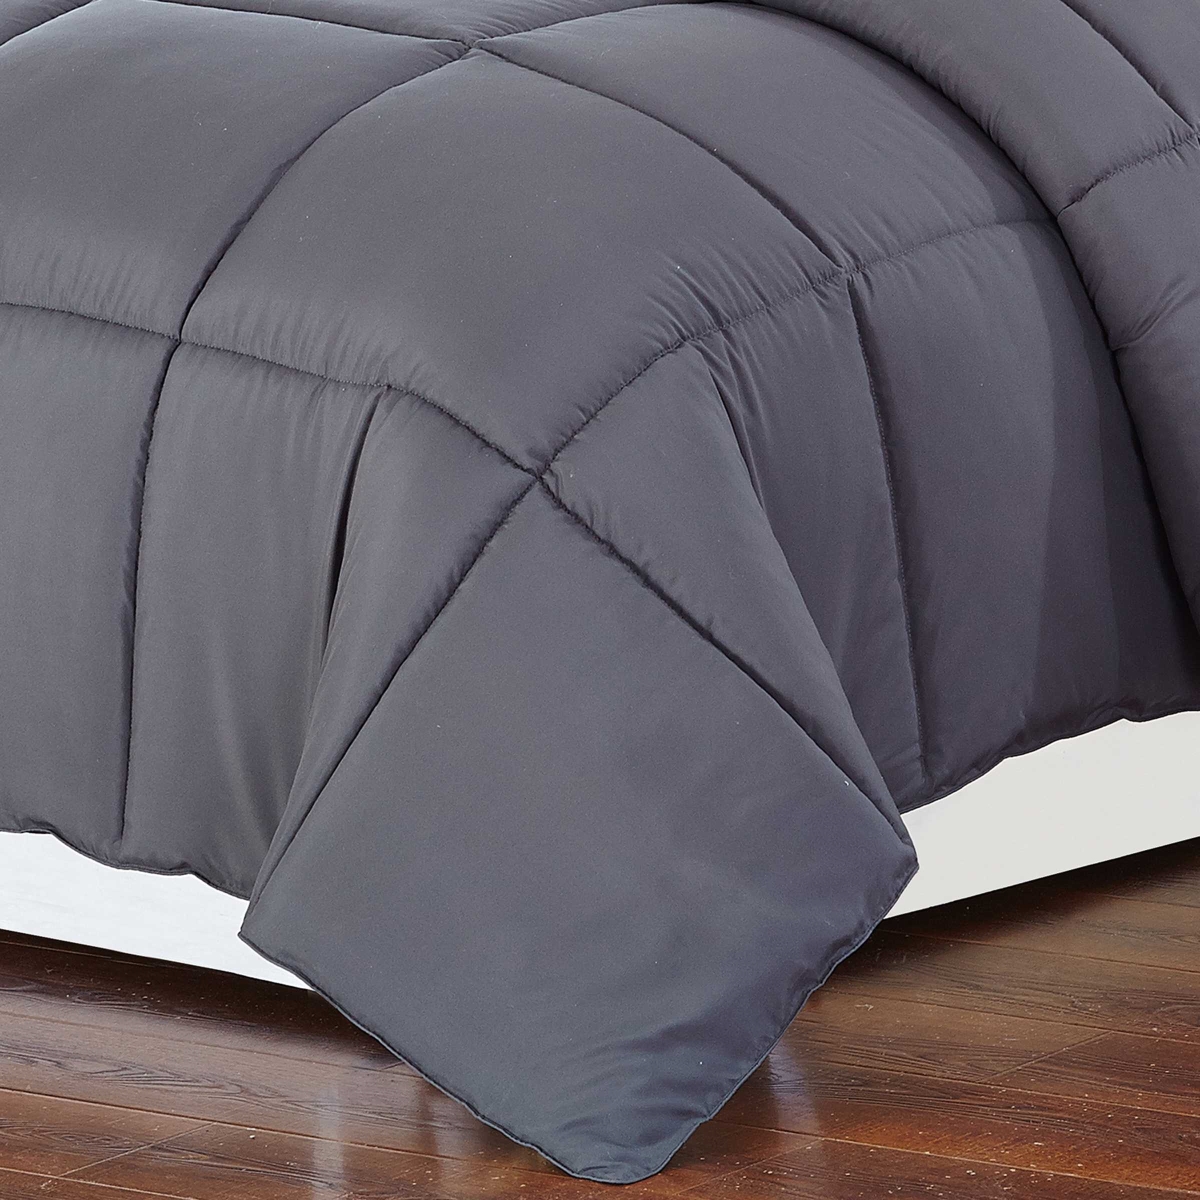 303545 1 X 60 X 80 In. Luxry Cozy Soft Square Quilted Throw Blanket & Back Fleece Navy Blue